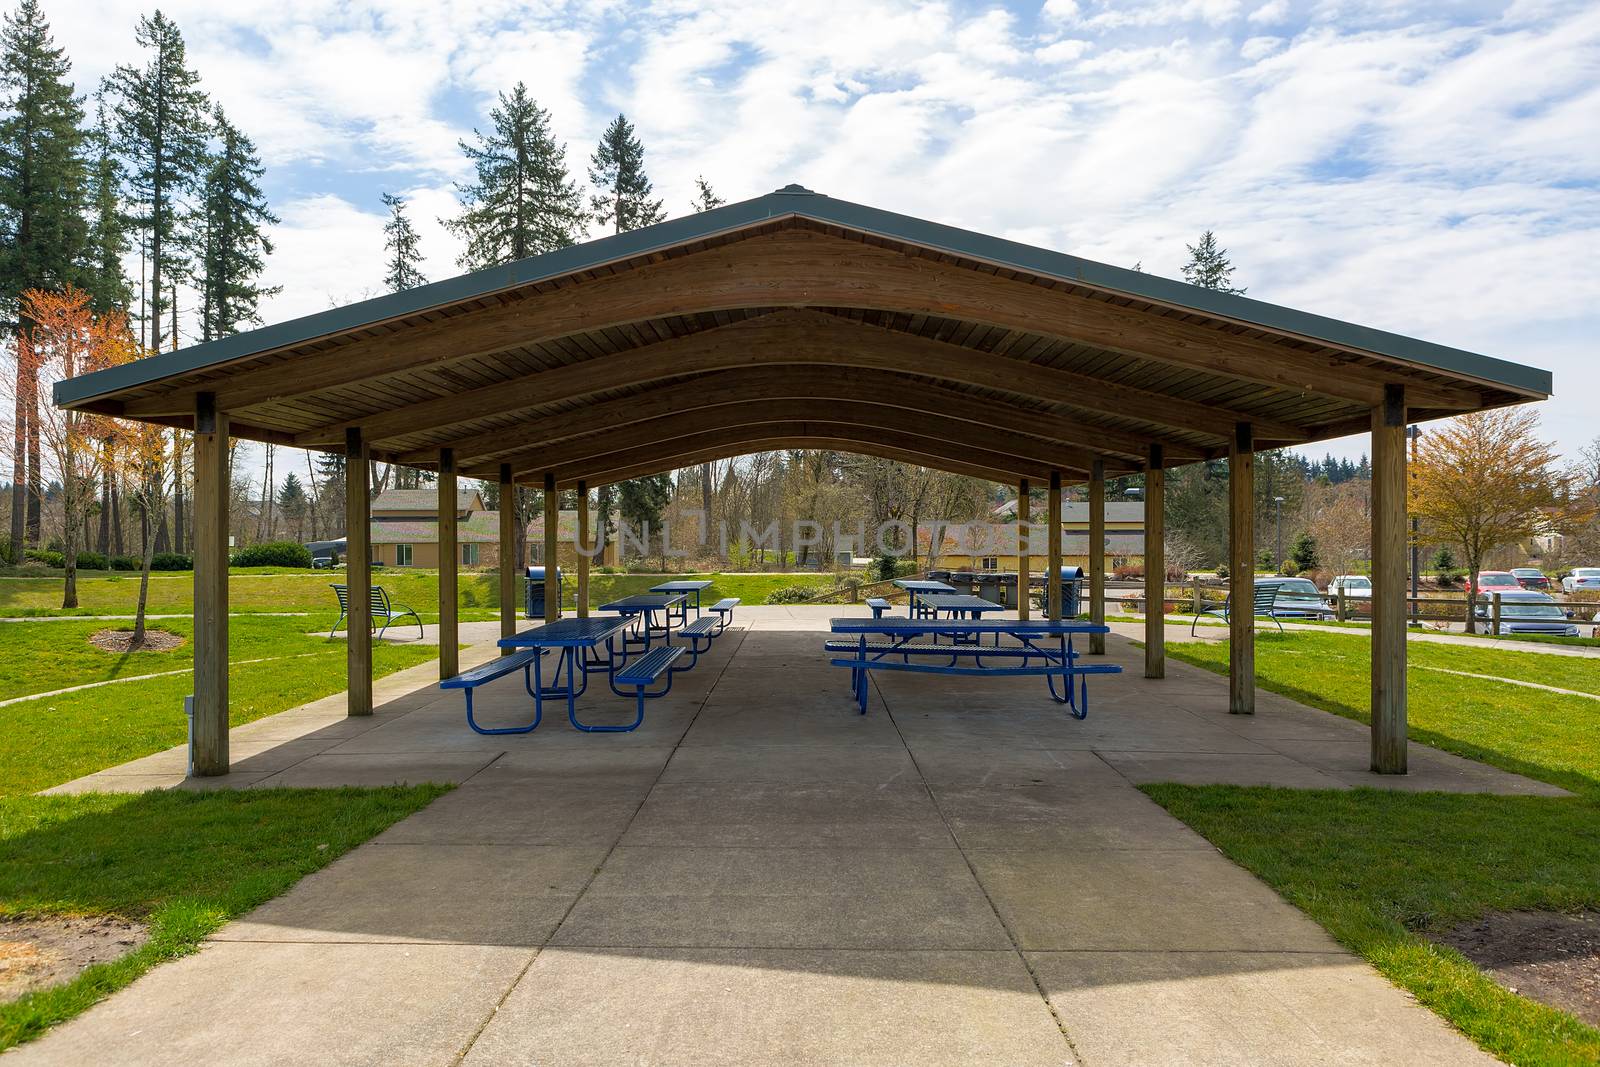 Picnic Tables under Shelter in Suburban City Park by jpldesigns